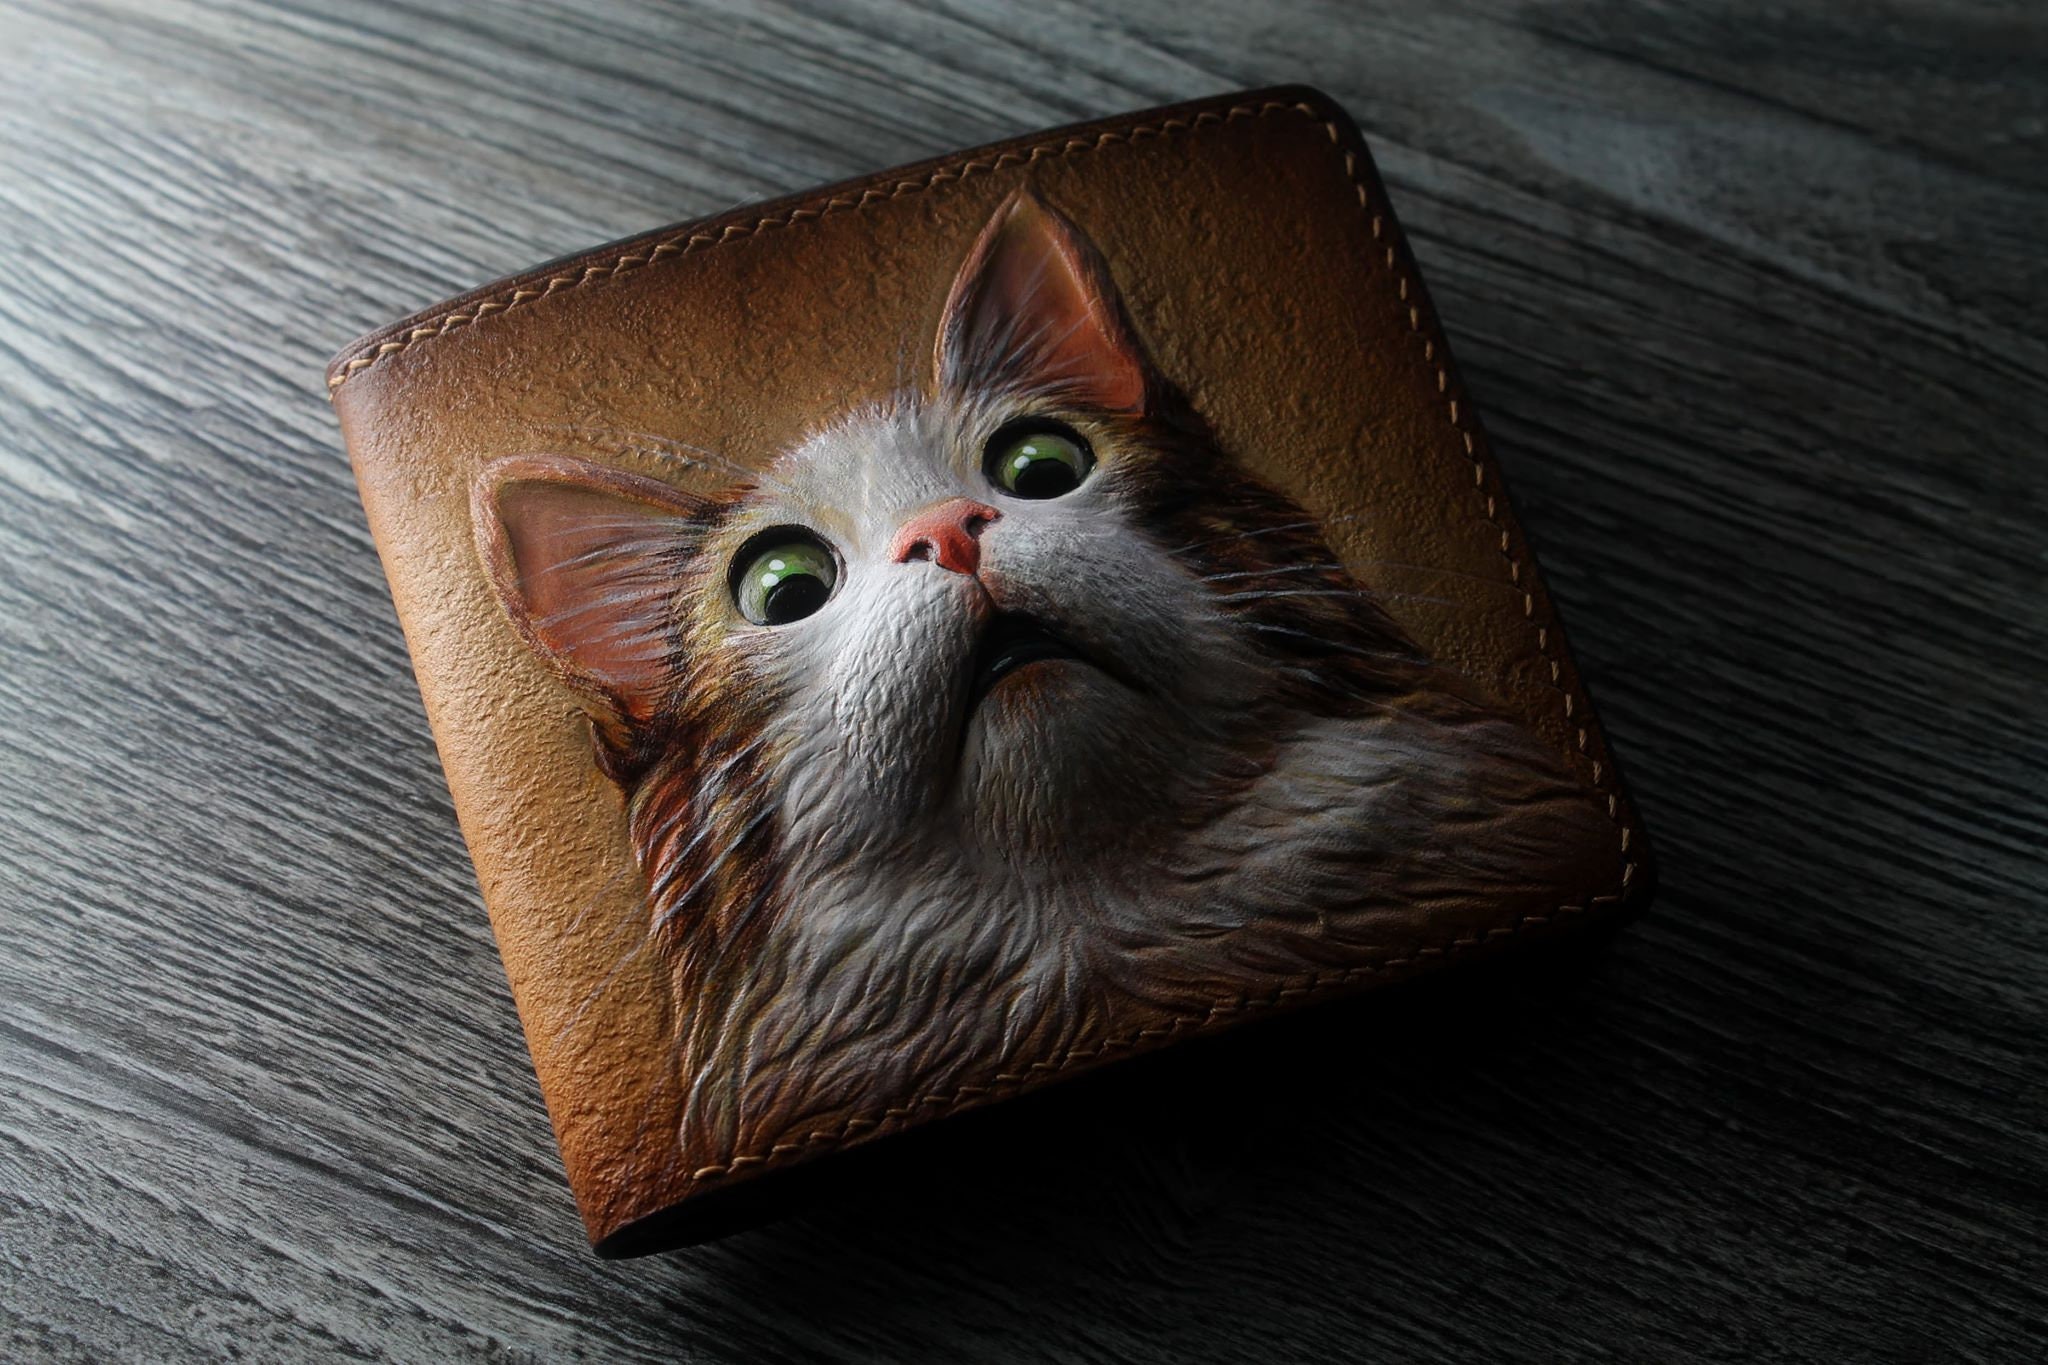 Leather Wallet. Tooled Wallet With Cute Cat. Carved Custom 